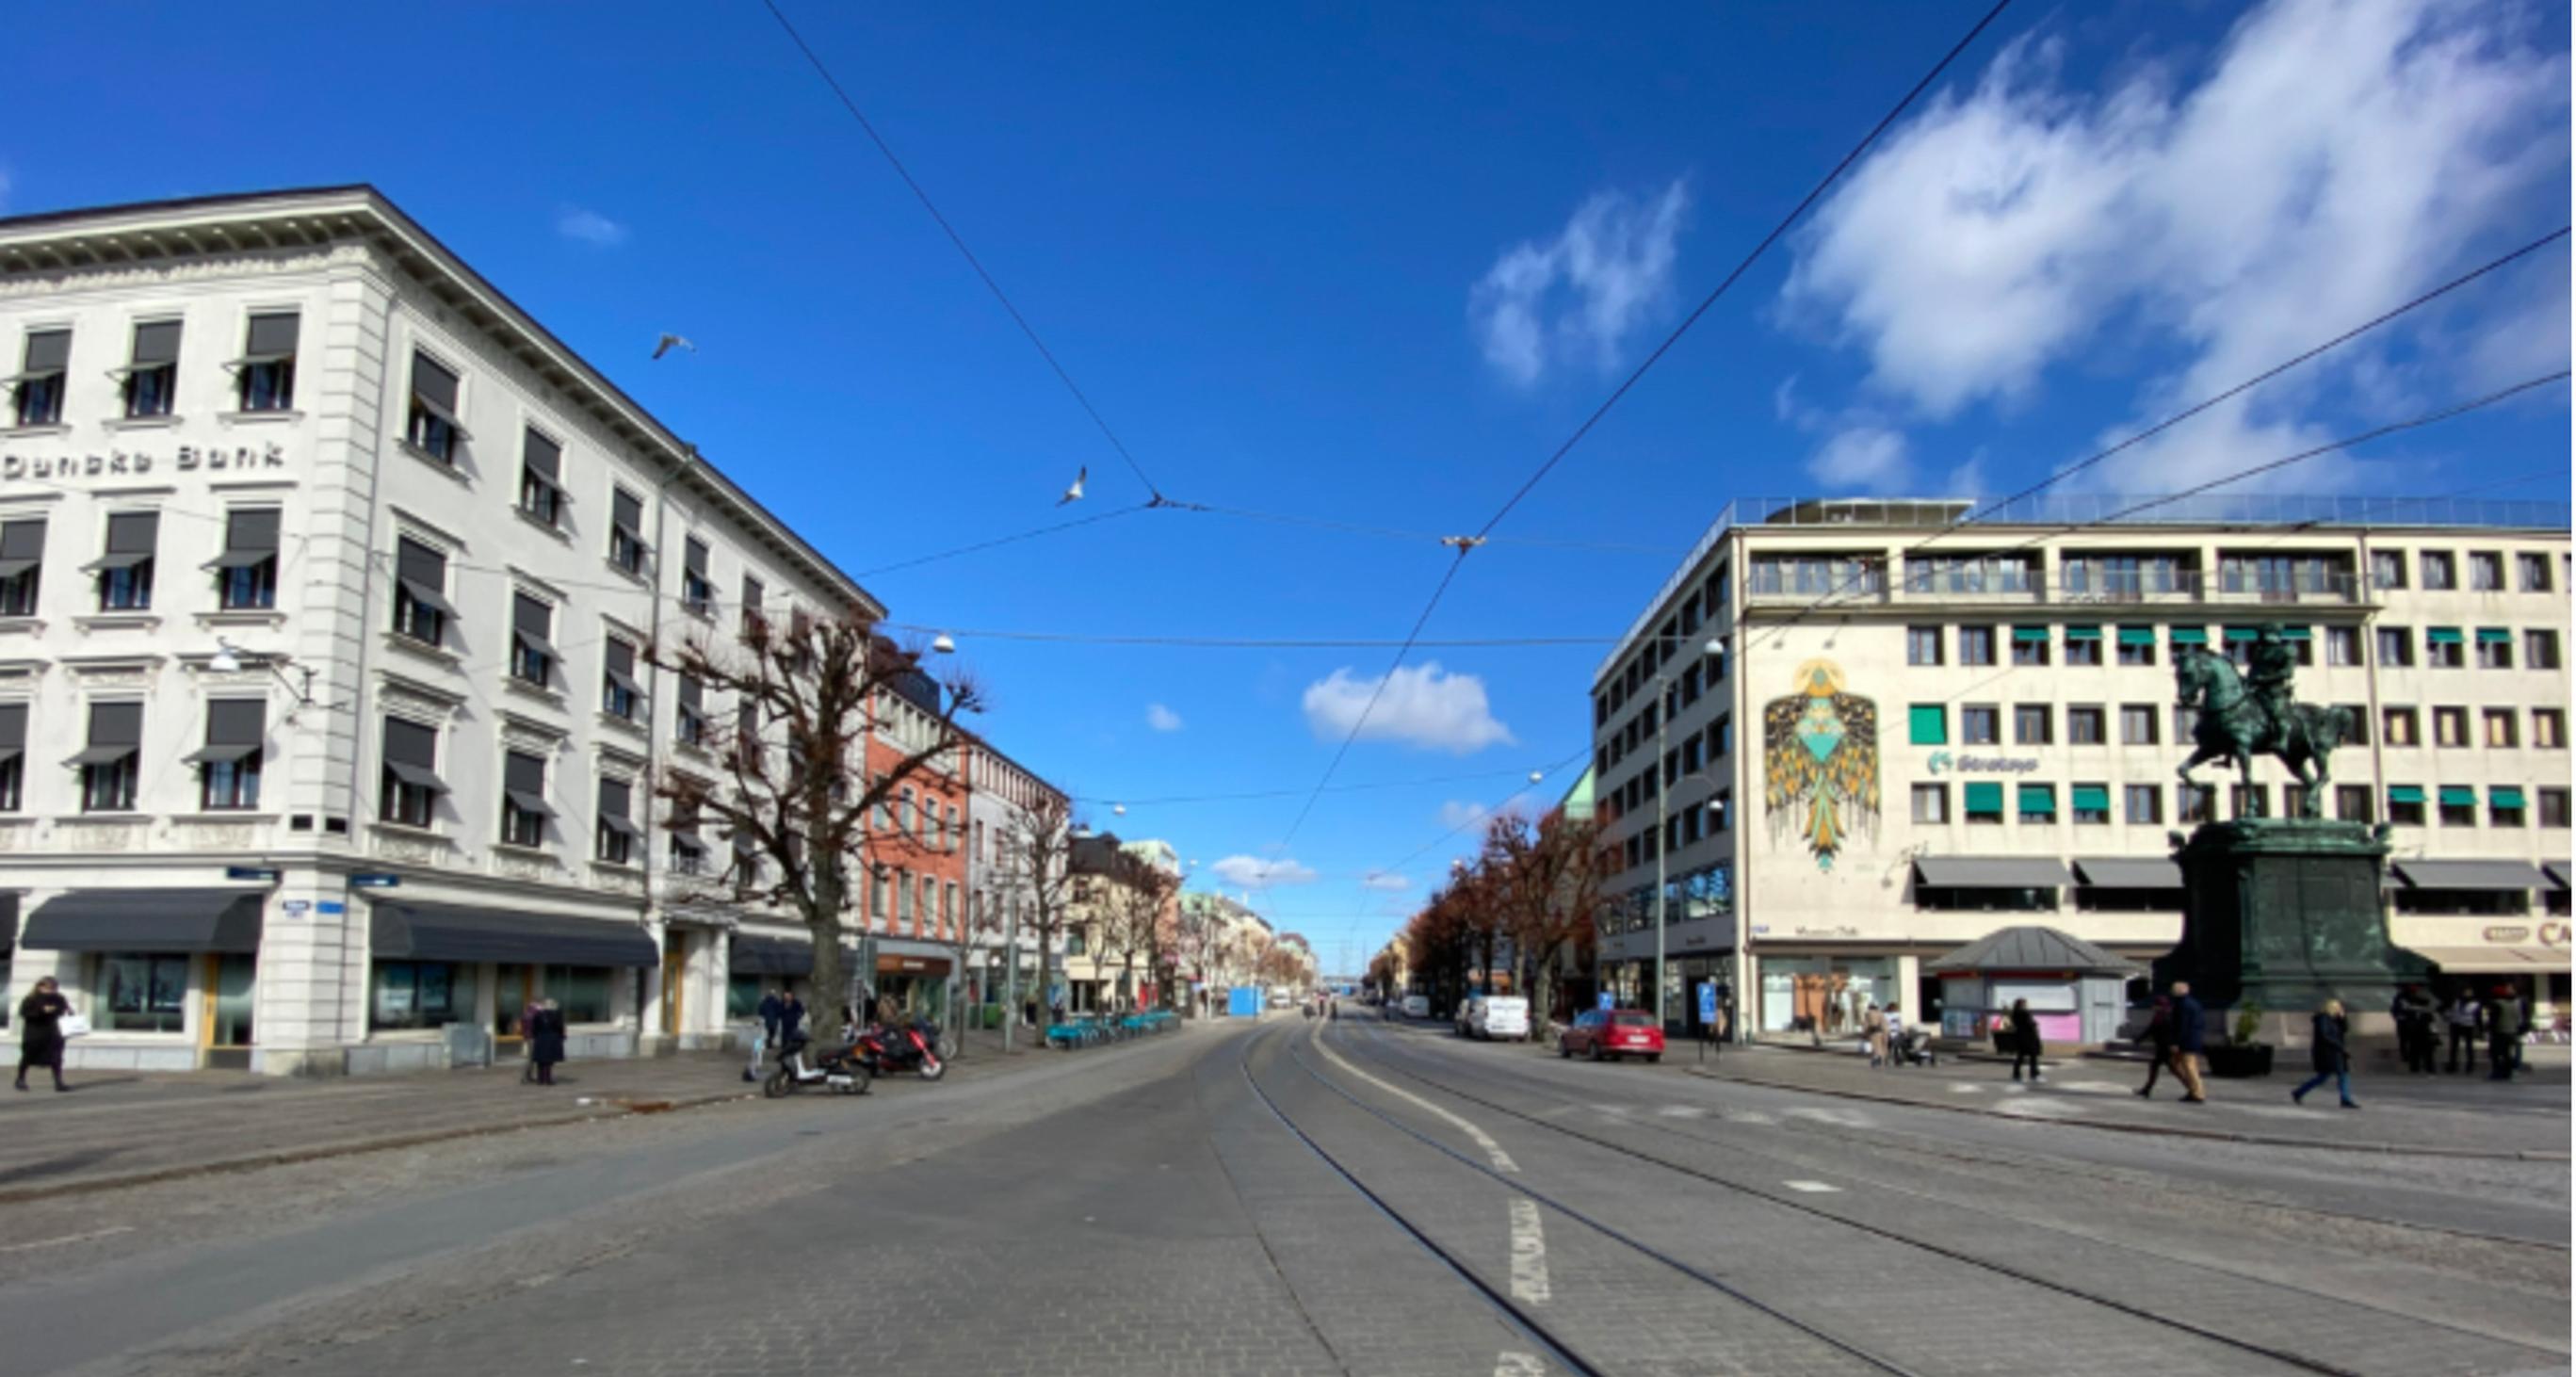 Gothenburg is largely traffic free city experience populated with good walking, cycling and public transport offers and with very little traffic